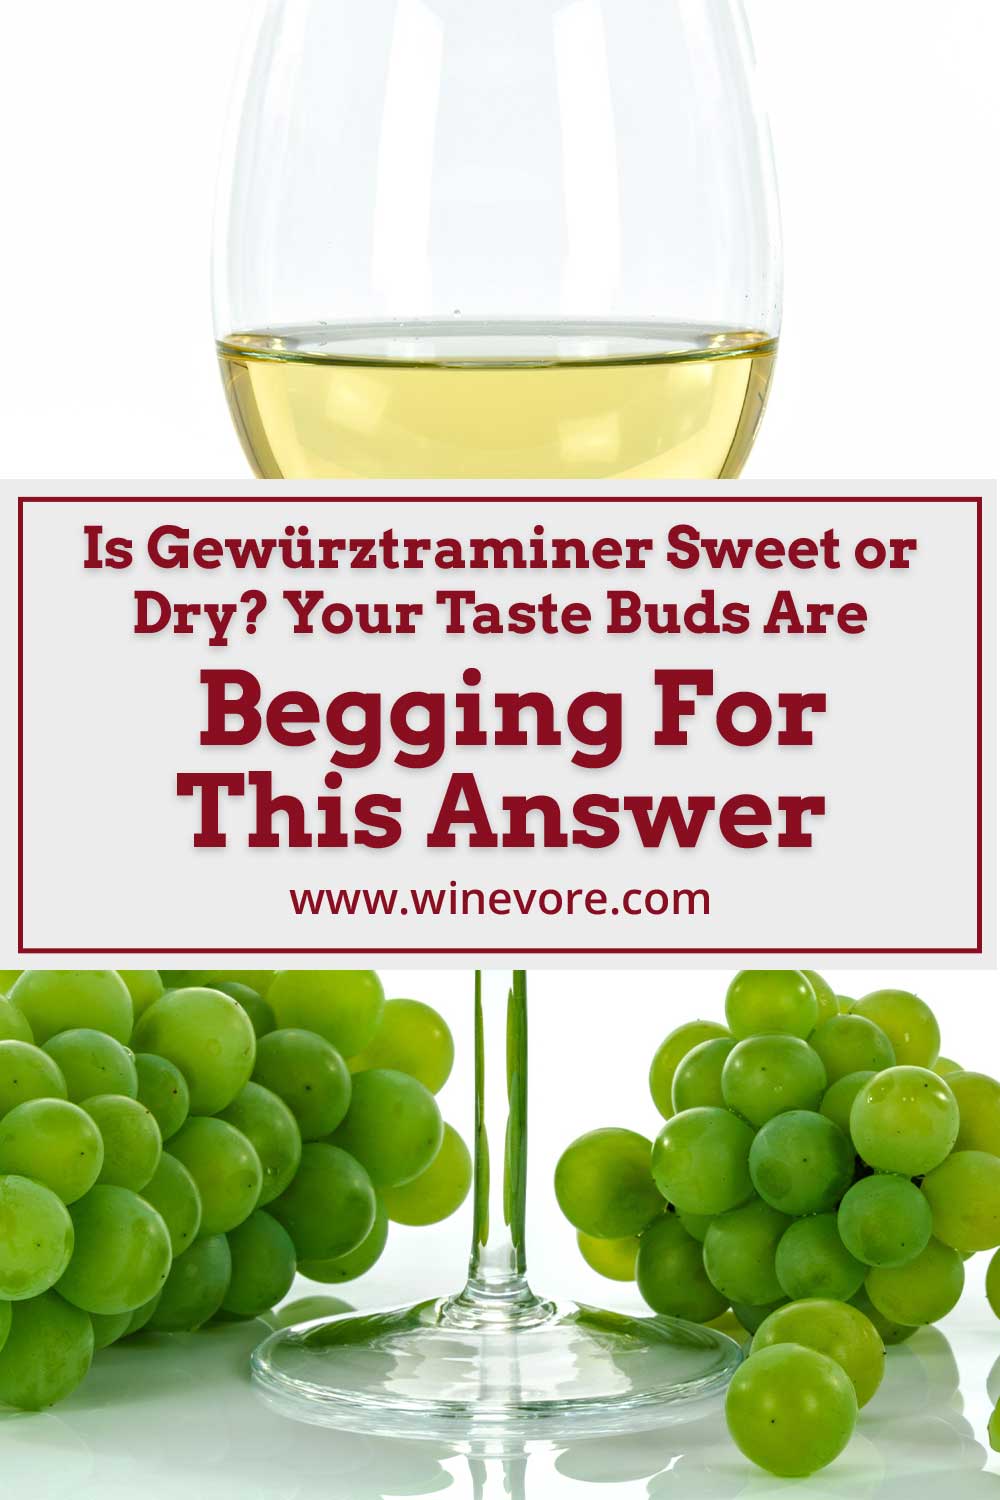 A wine filled glass and green grapes are in the bottom - Is Gewürztraminer Sweet or Dry? Your Taste Buds Are Begging For This Answer.